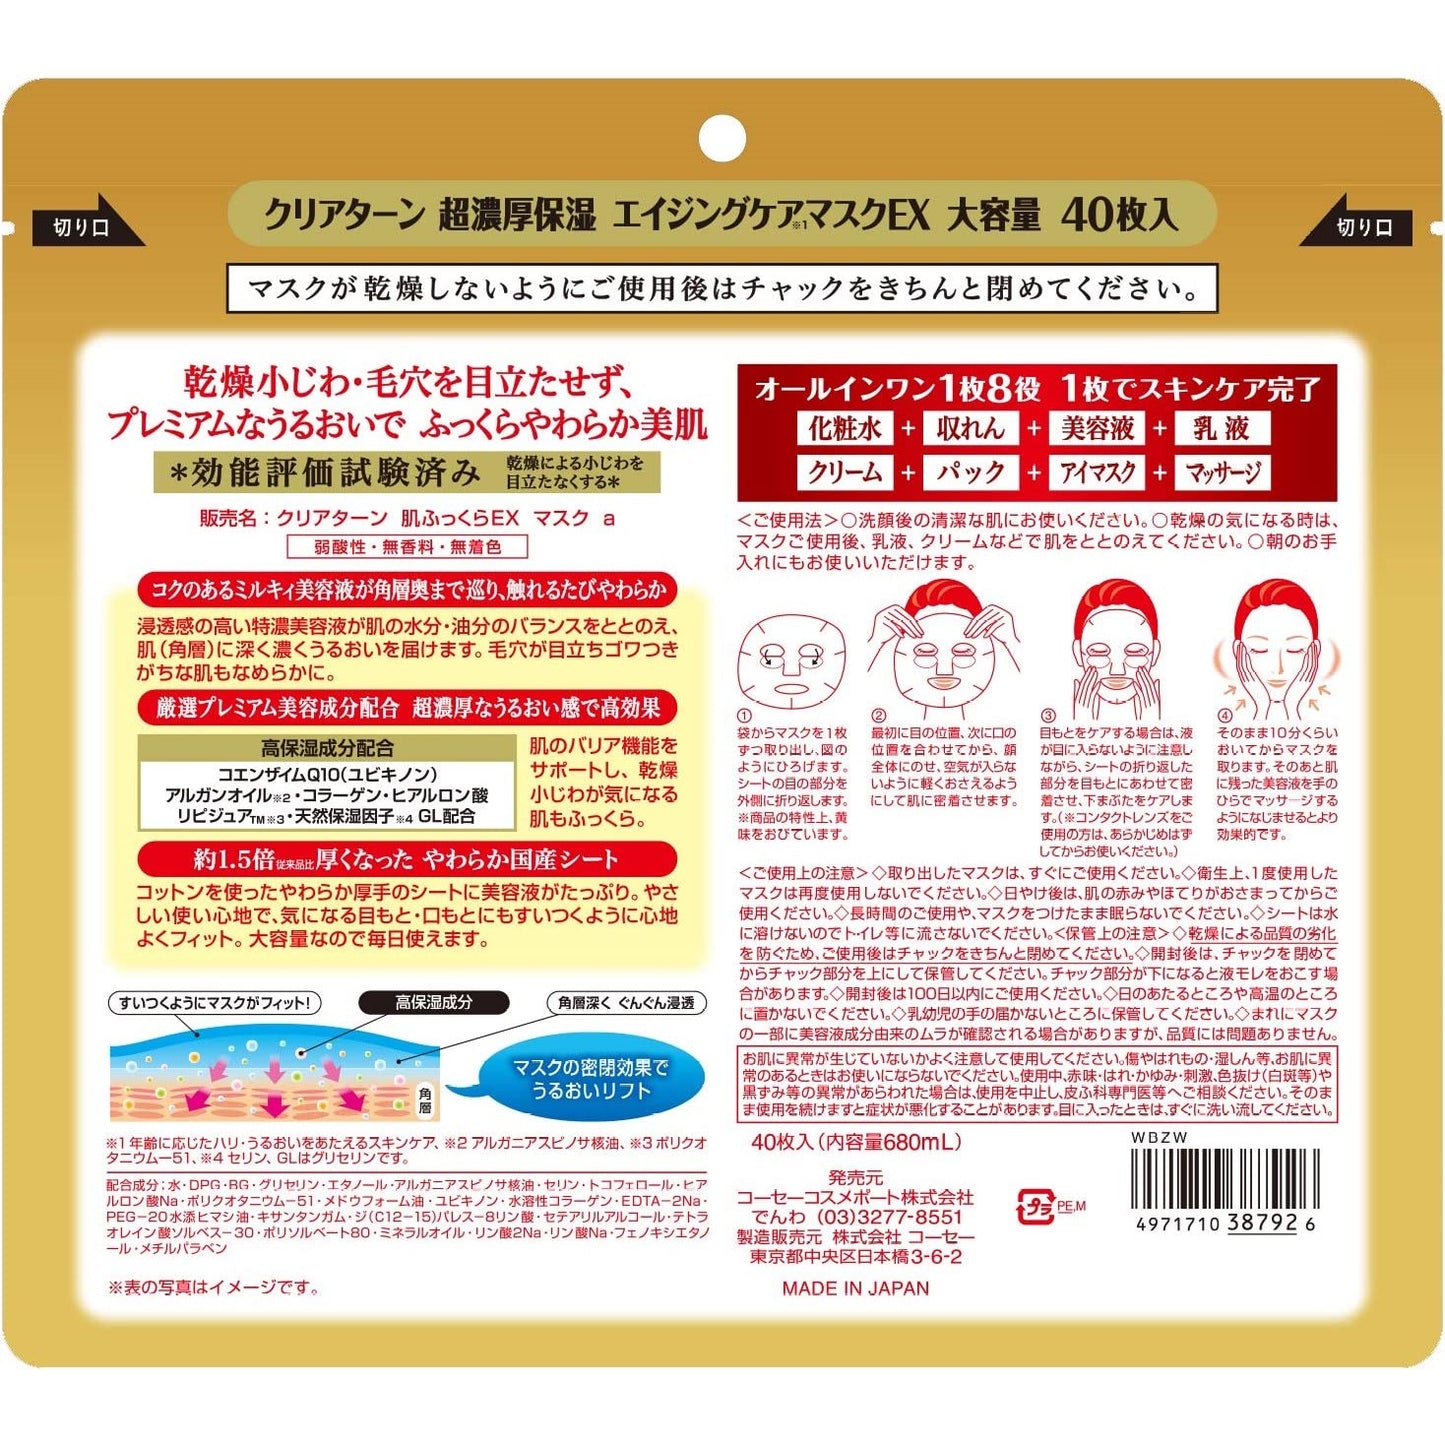 Kose Clear Turn Ultra Concentrated Moisturizing Mask